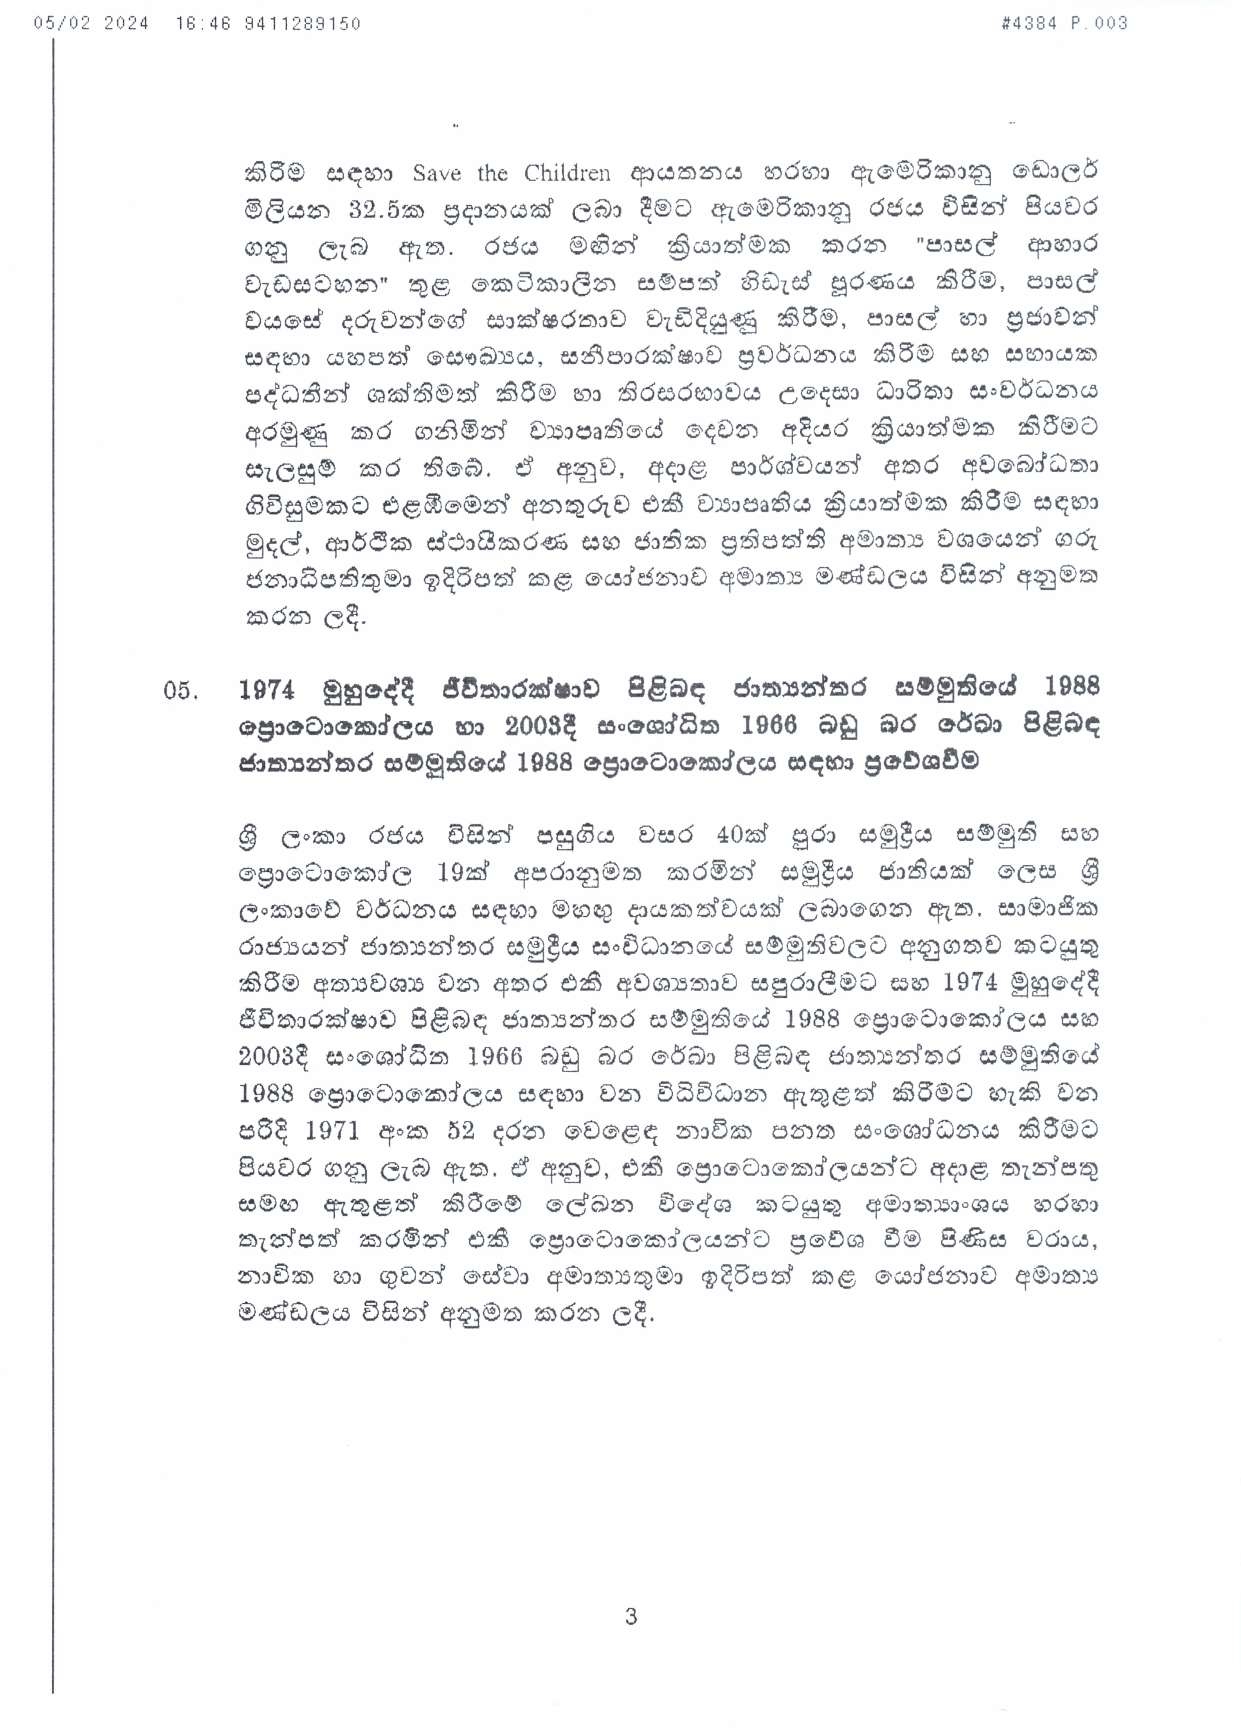 Cabinet Decision on 05.02.2024 page 0003